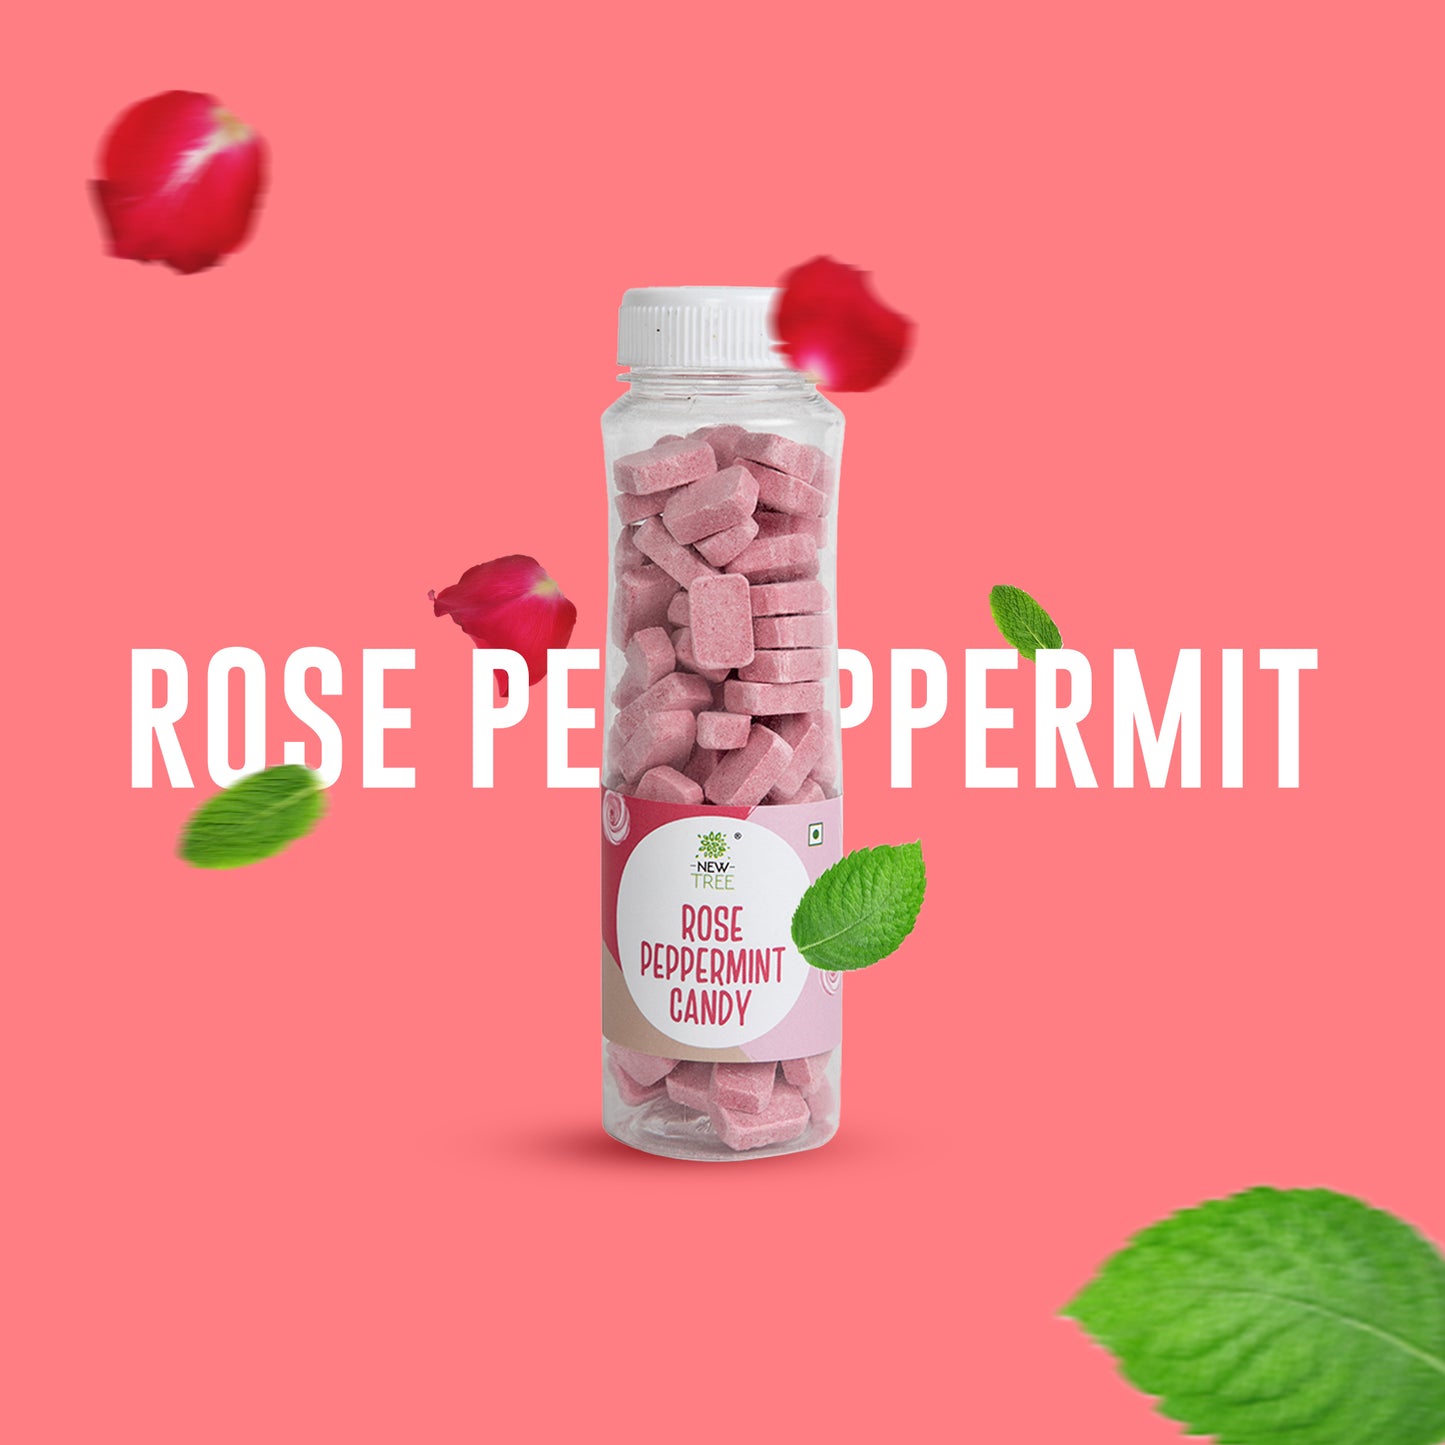 Rose Peppermint Candy